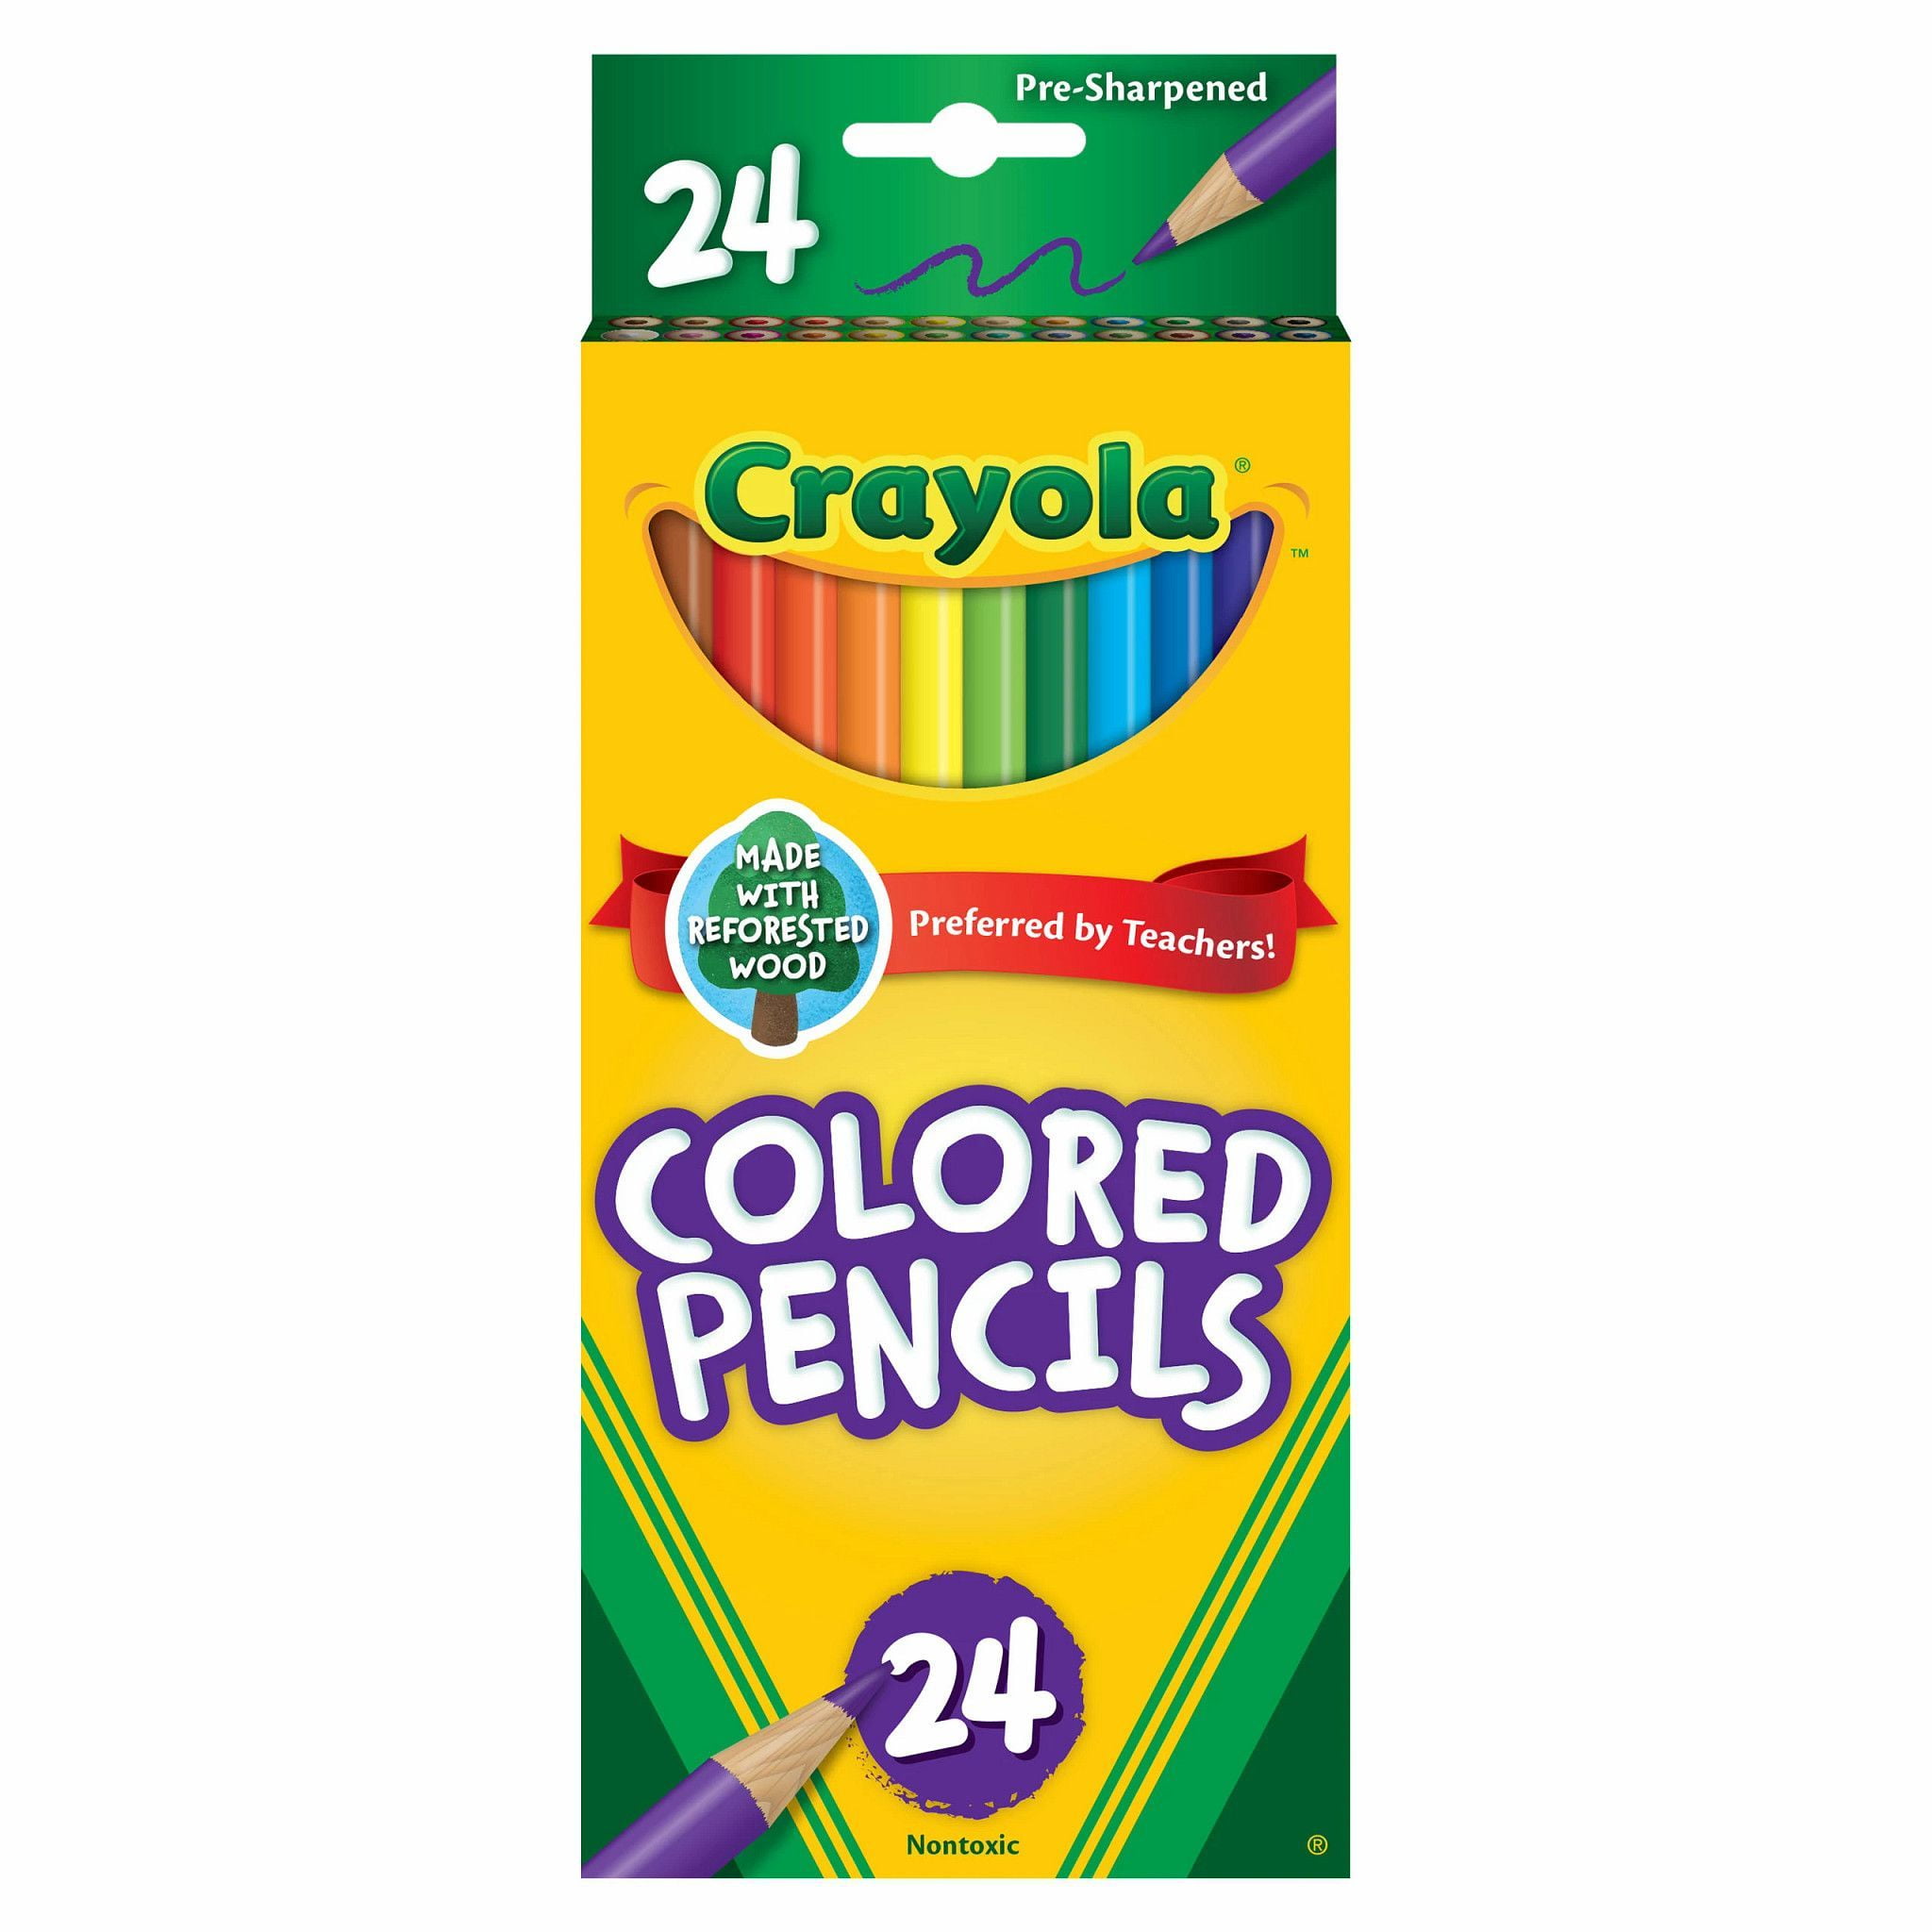 Crayola Colored Pencils, School Supplies, Assorted Colors, Pre-sharpened, 24 Count